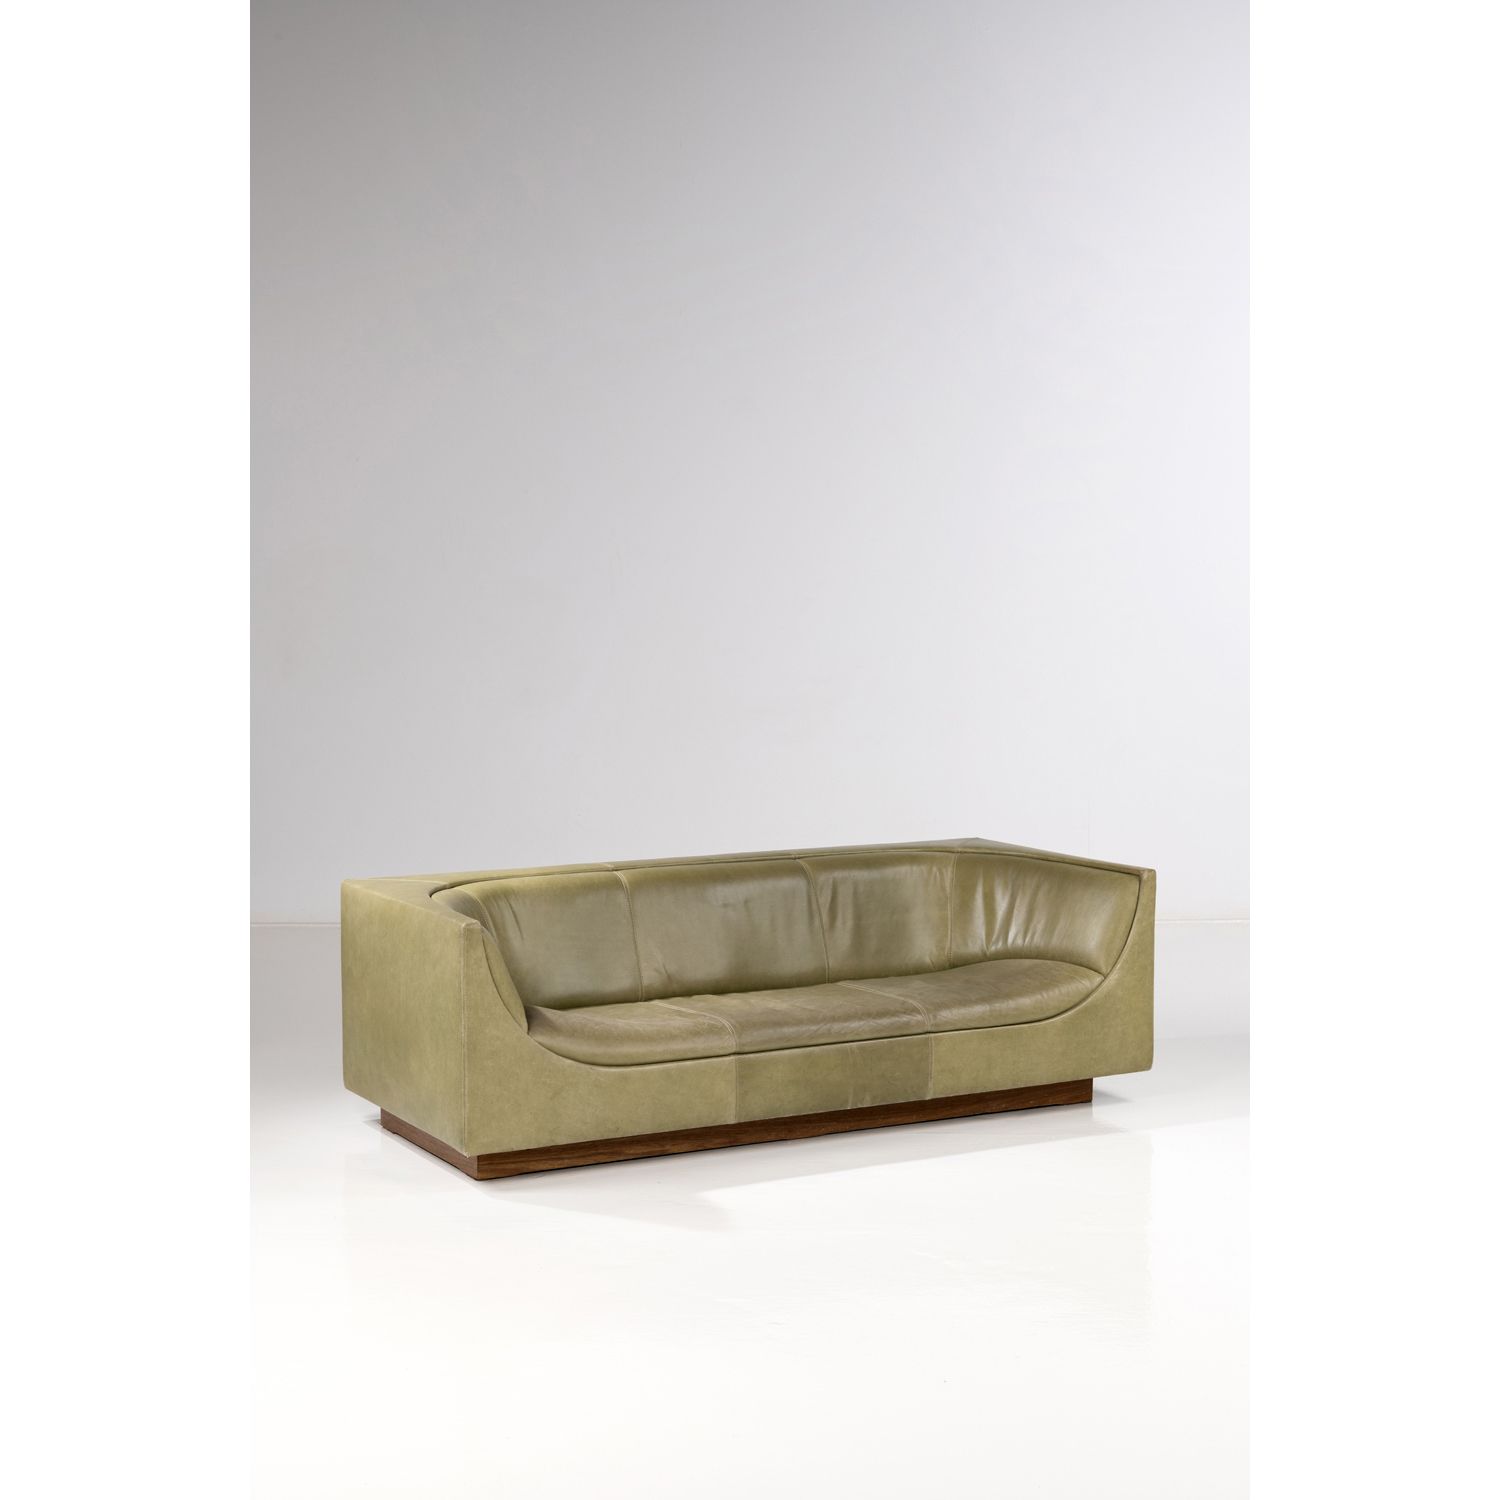 Null Jorge Zalszupin (1922-2020)

Cubo

Sofa

Leather and wood

Edited by L'Atel&hellip;